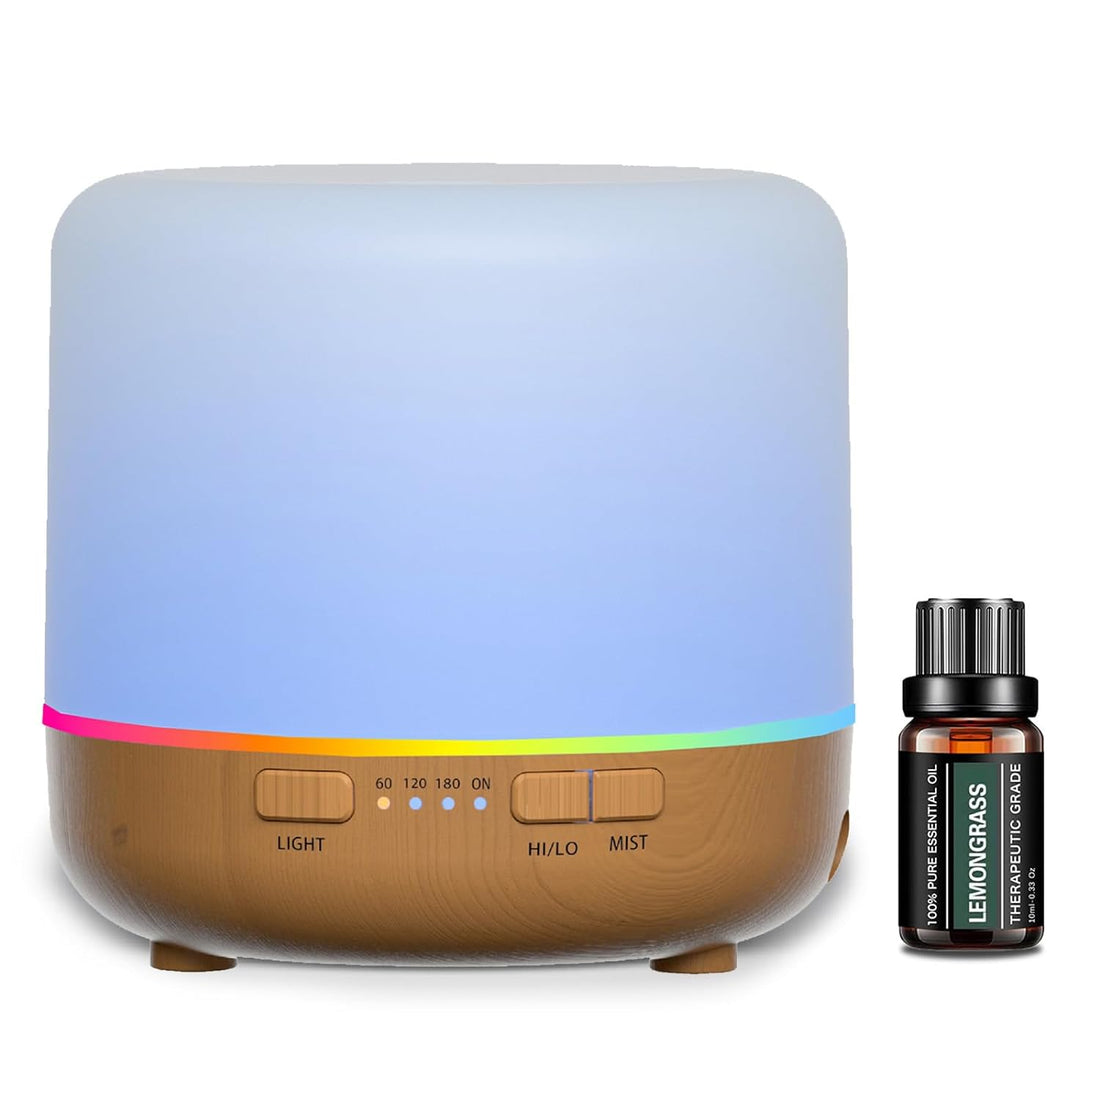 Small Diffusers 200ml Colorful Essential Oil Diffuser with Adjustable Mist Mode,Auto Off Aroma Diffuser for Bedroom/Office/Home (Yellow+Lemongrass)